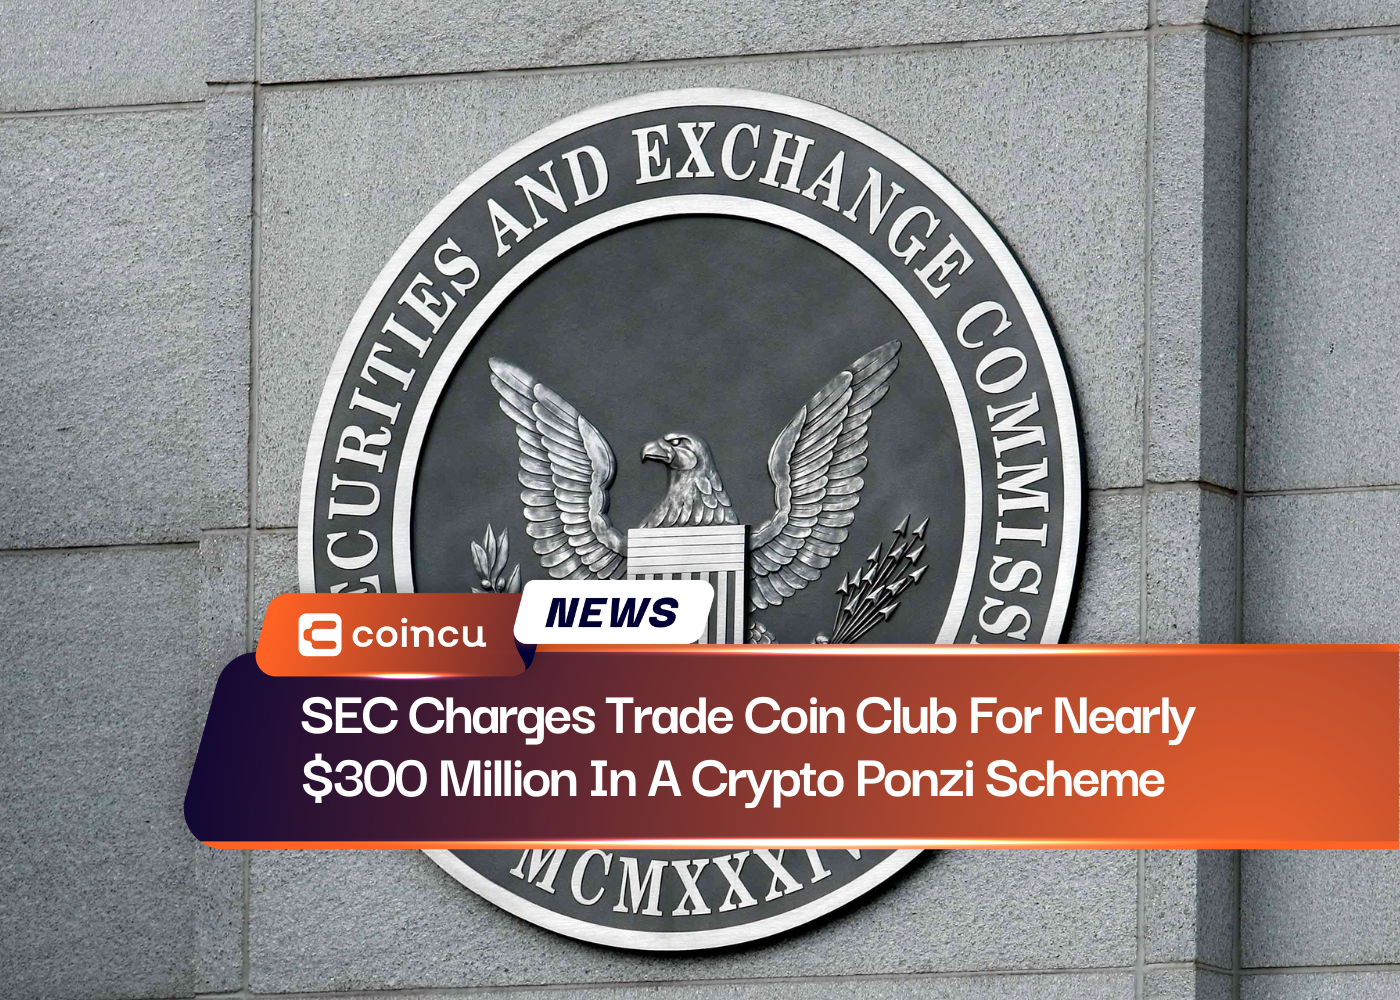 SEC Charges Trade Coin Club For Nearly $300 Million In A Crypto Ponzi Scheme